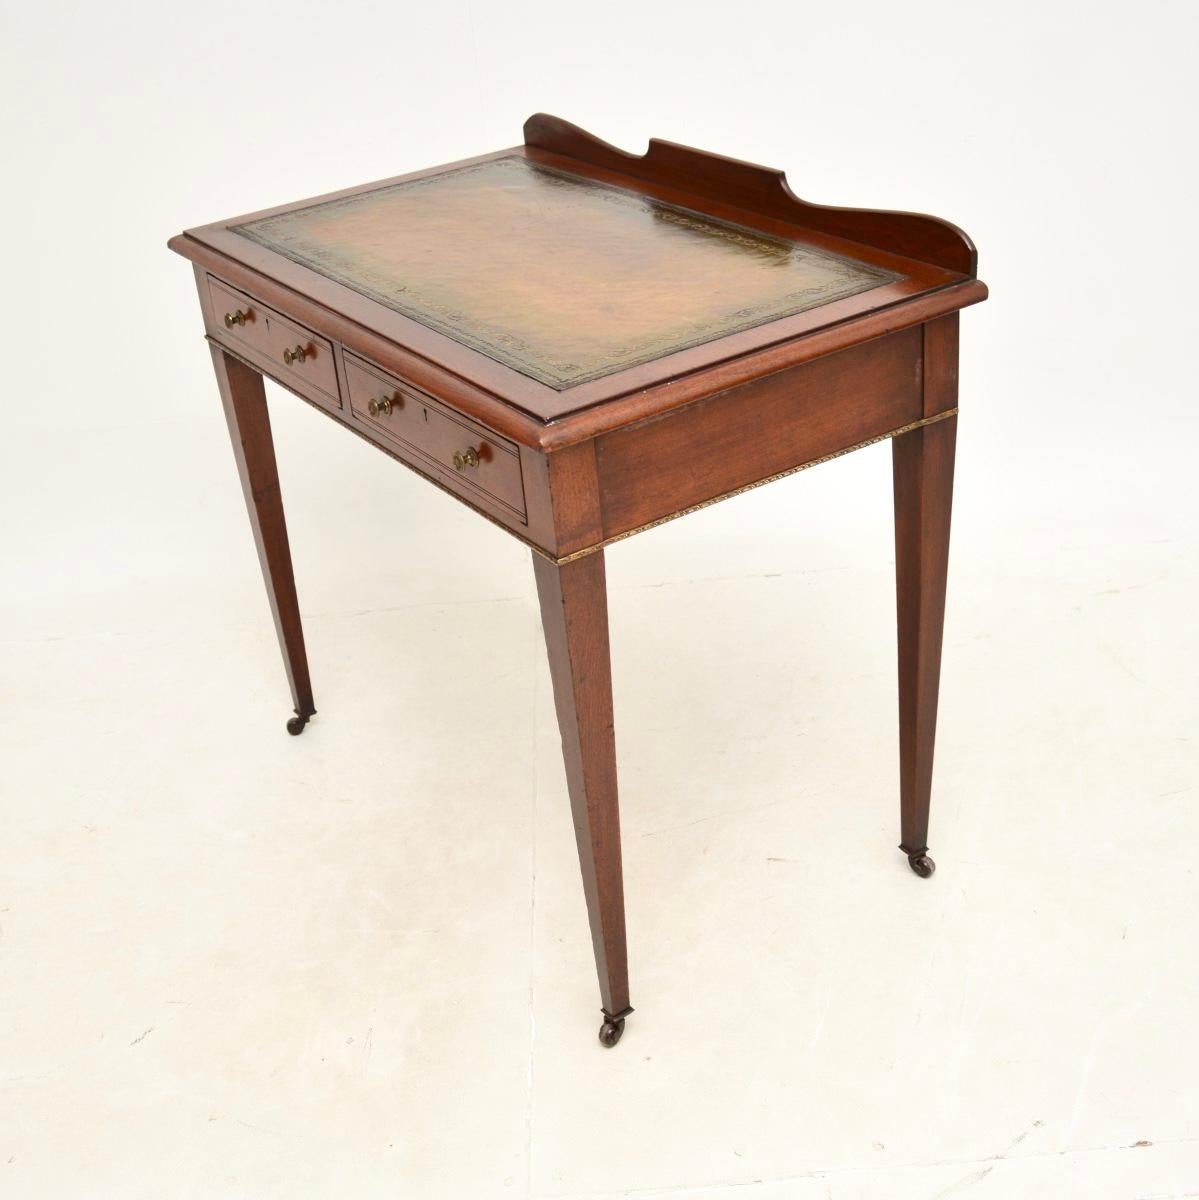 Antique Edwardian Desk / Writing Table In Good Condition For Sale In London, GB